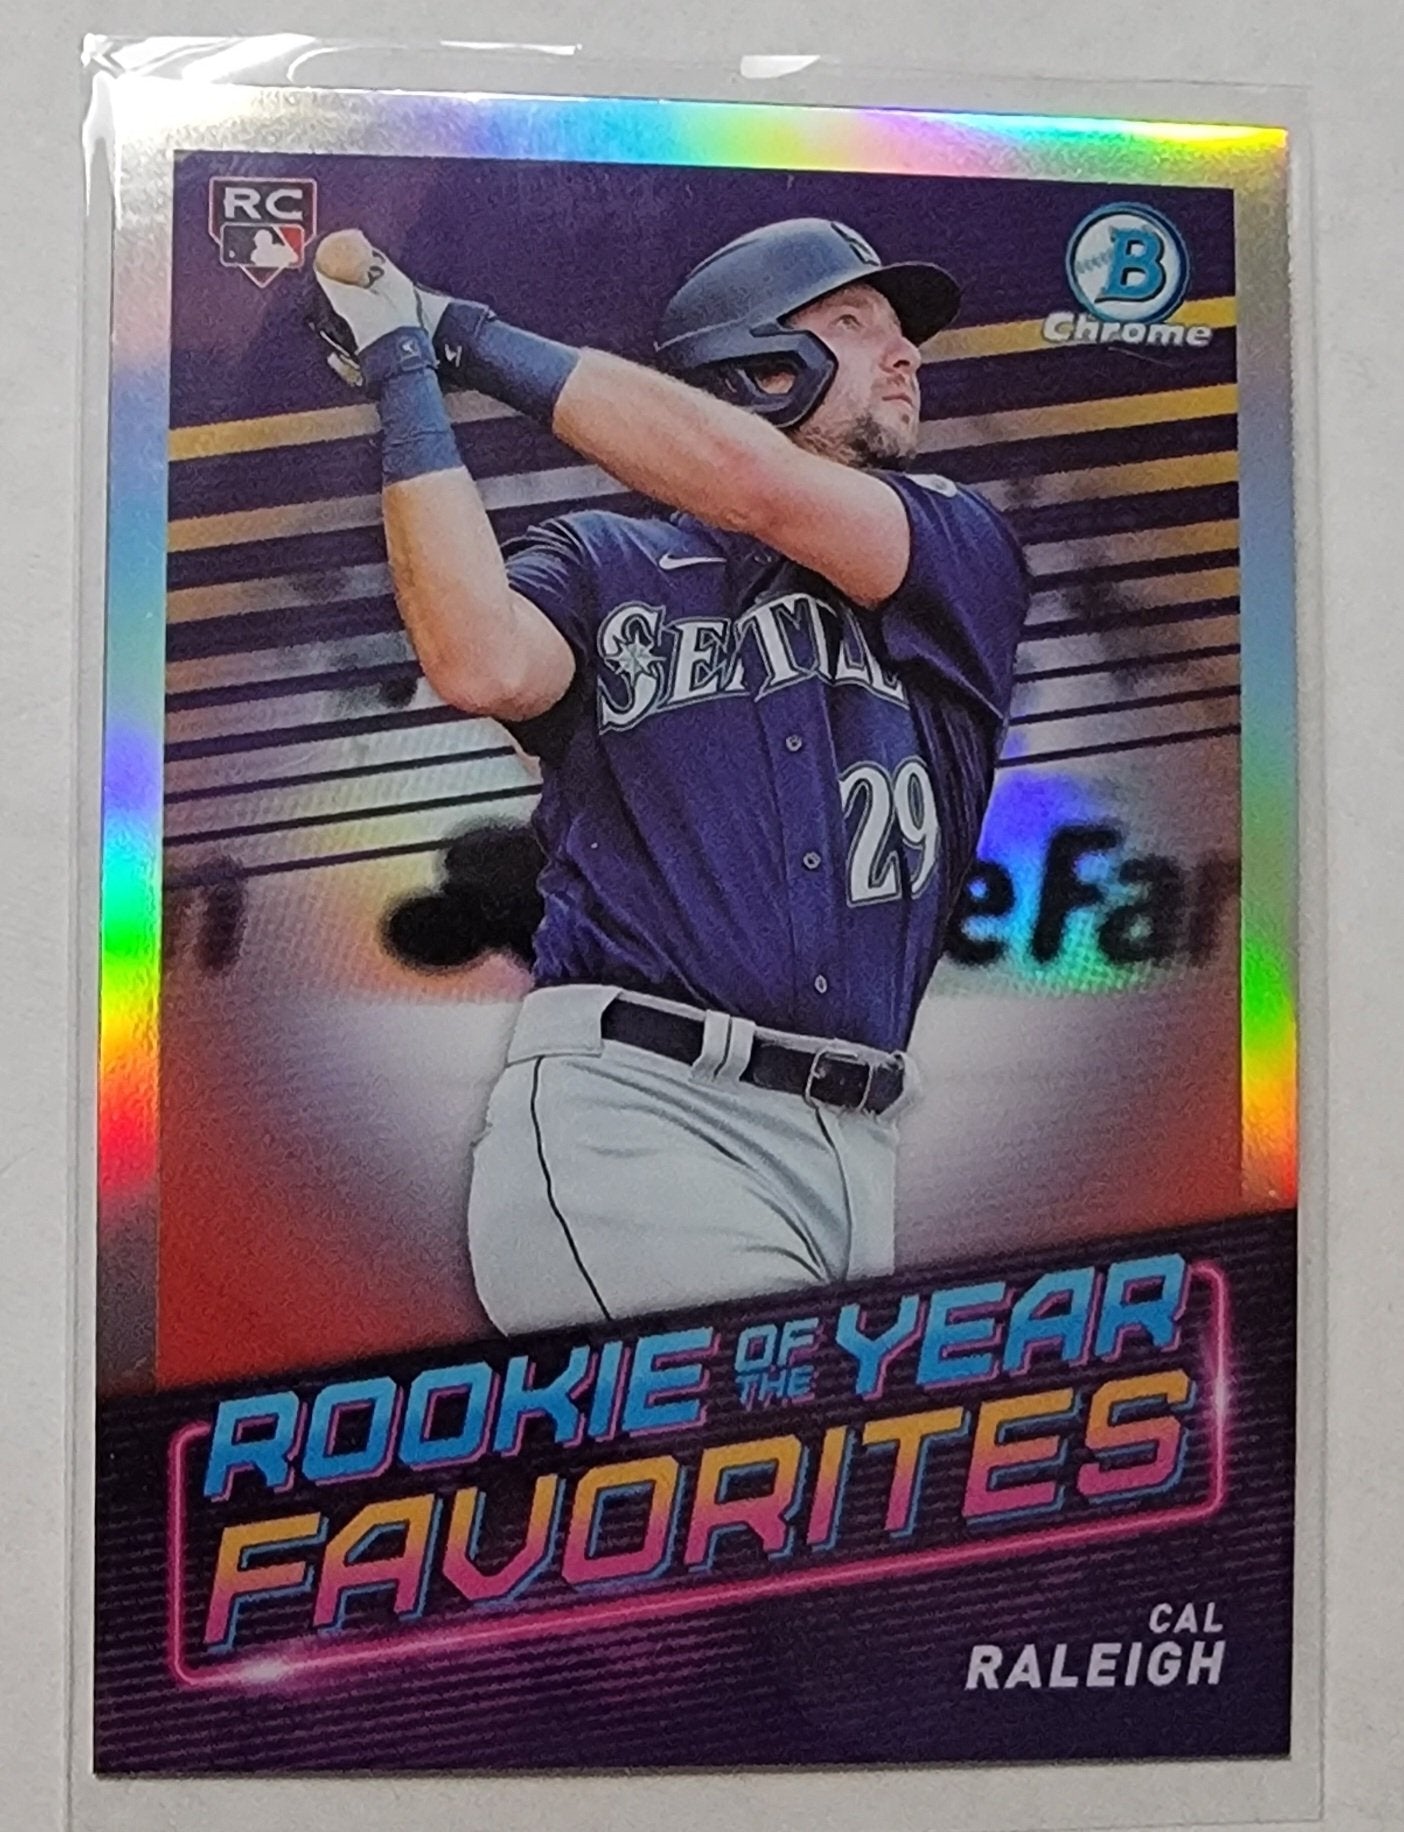 2022 Bowman Chrome Cal Raleigh Mega Box Rookie of the Year Favorites Baseball Card AVM1 simple Xclusive Collectibles   